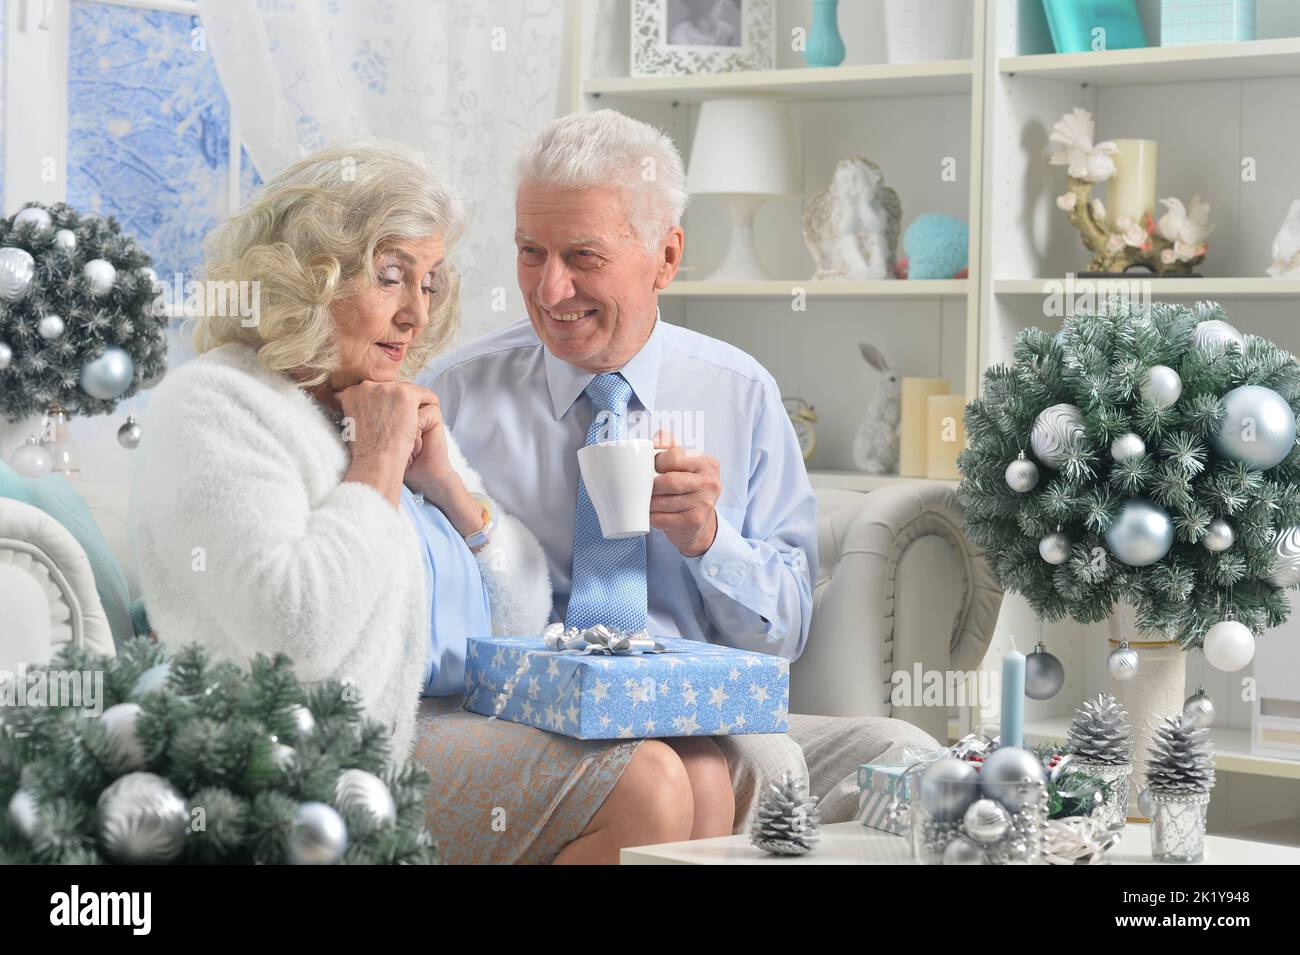 Elderly couple in a room with New Year's decor Stock Photo